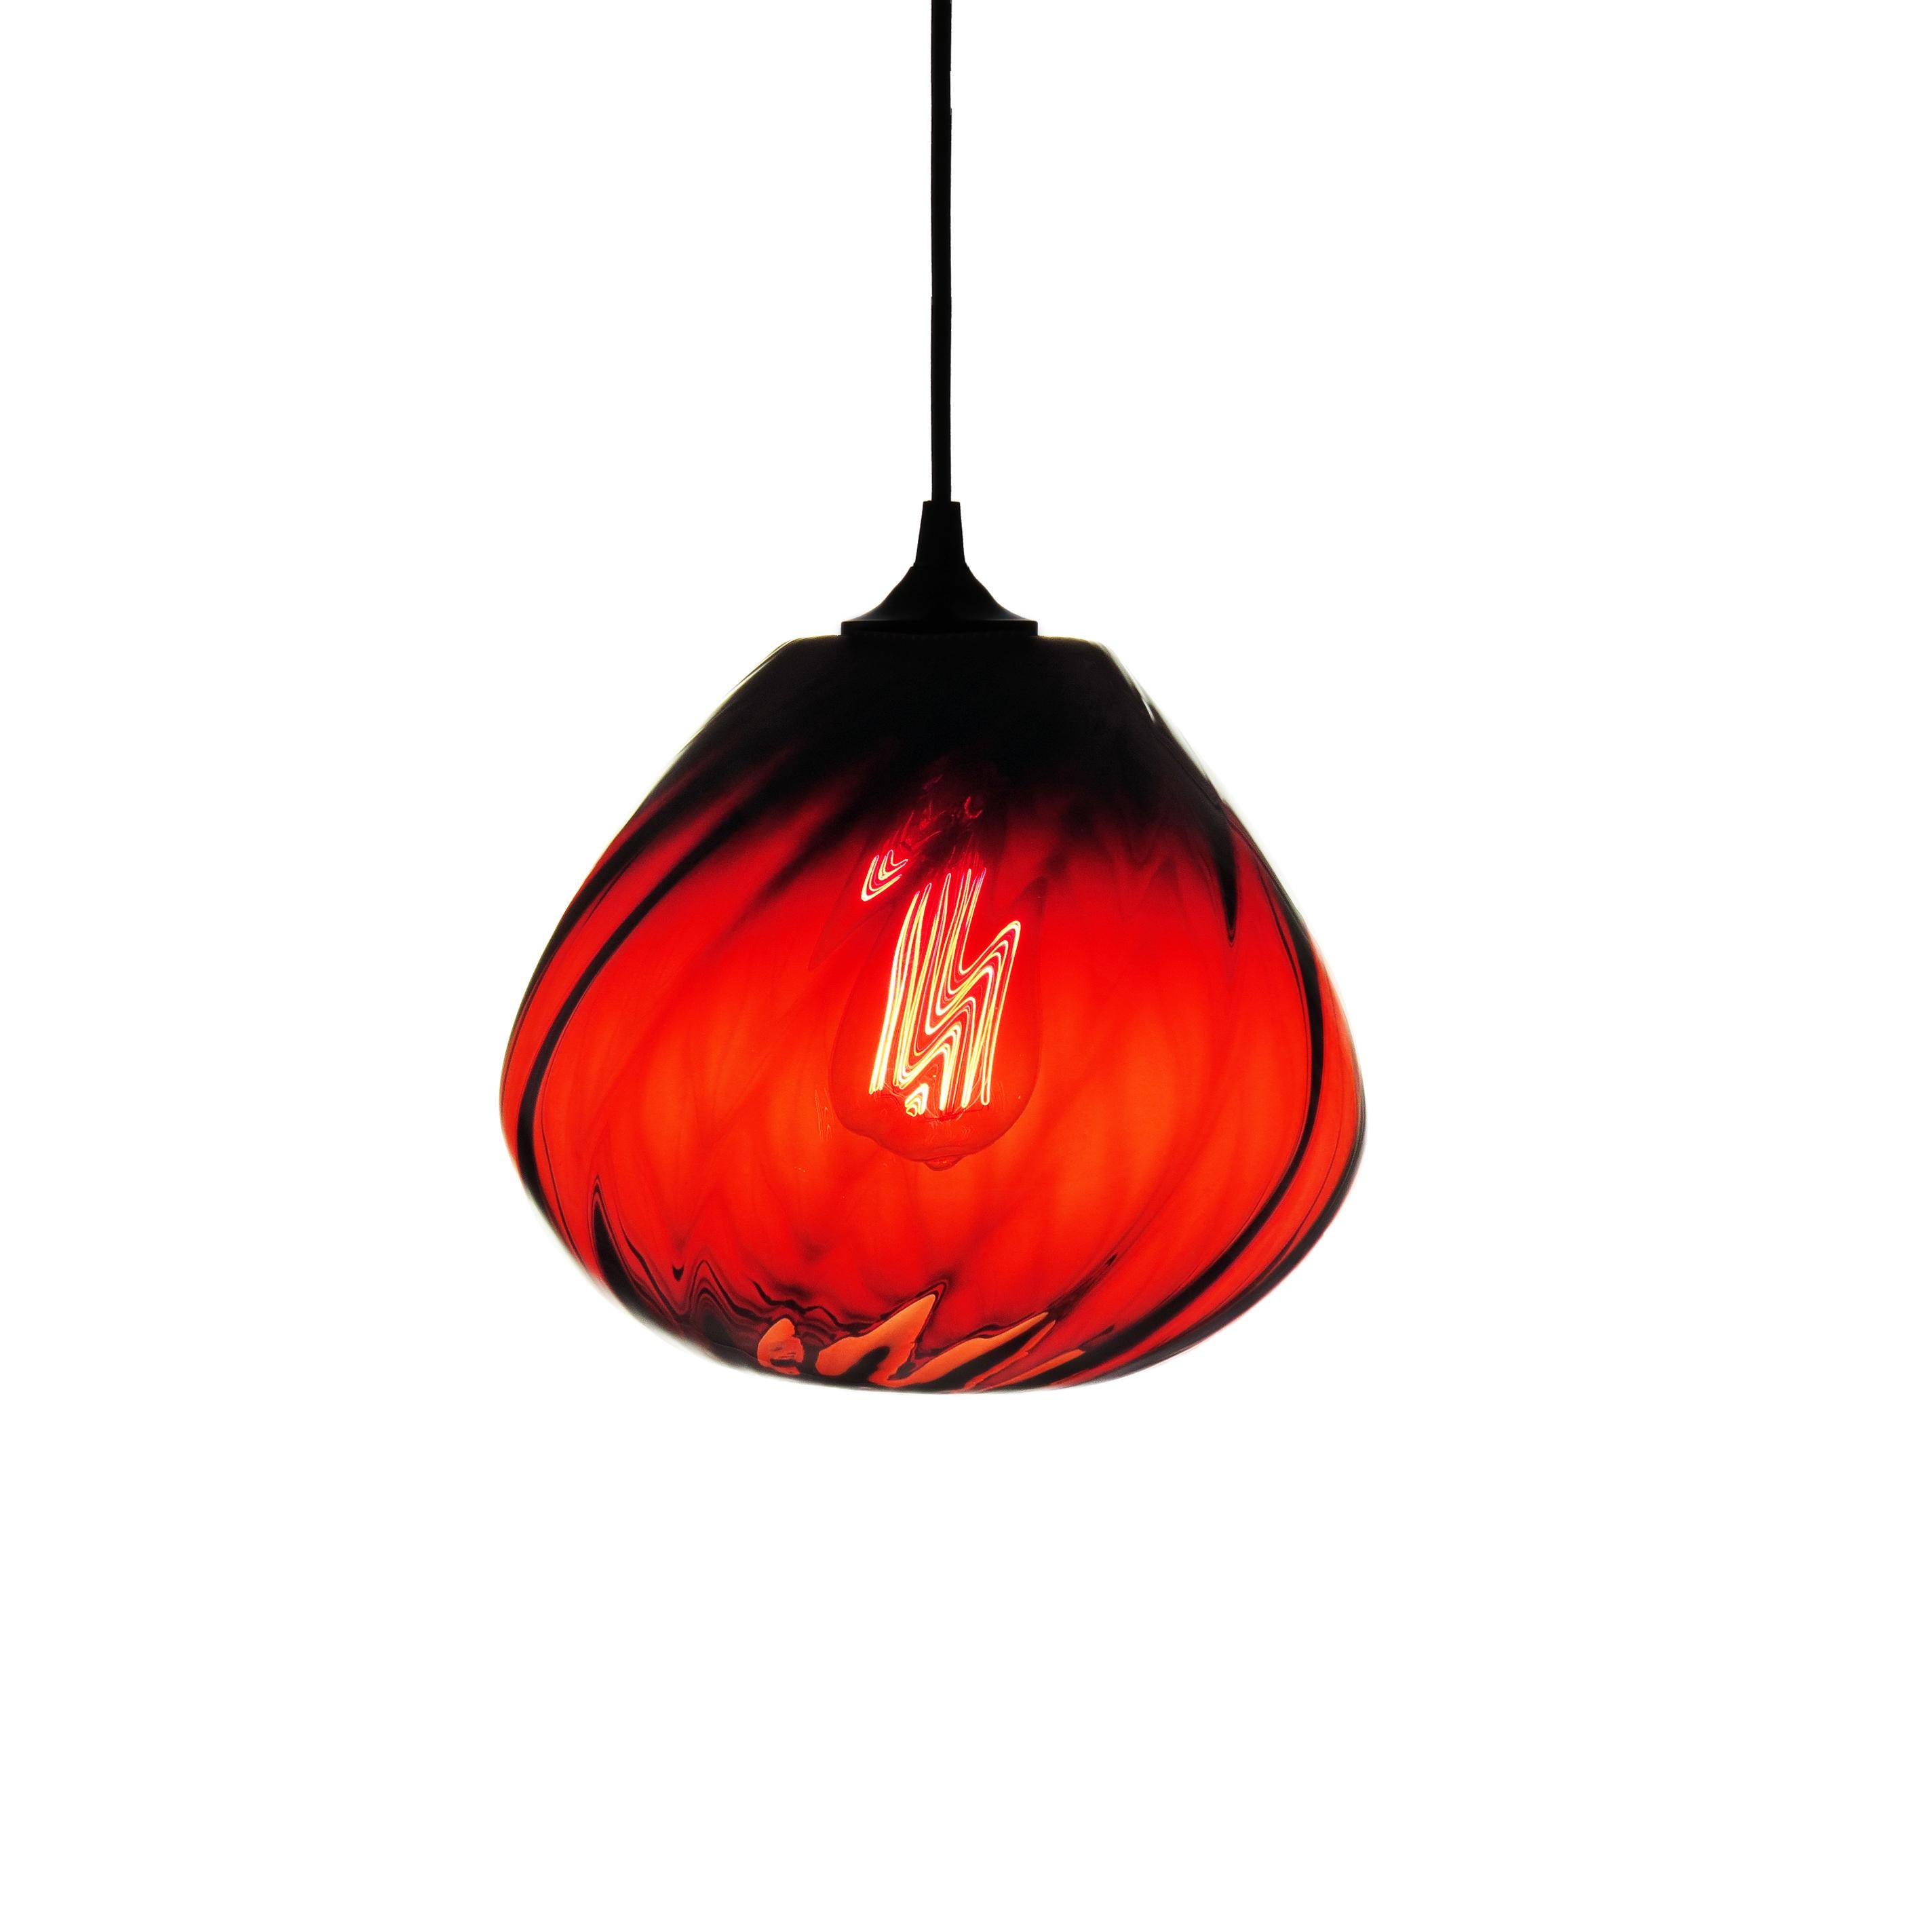 Transparent Hand Blown Glass Architectural Pendant Lamp with Optical Effect For Sale 1